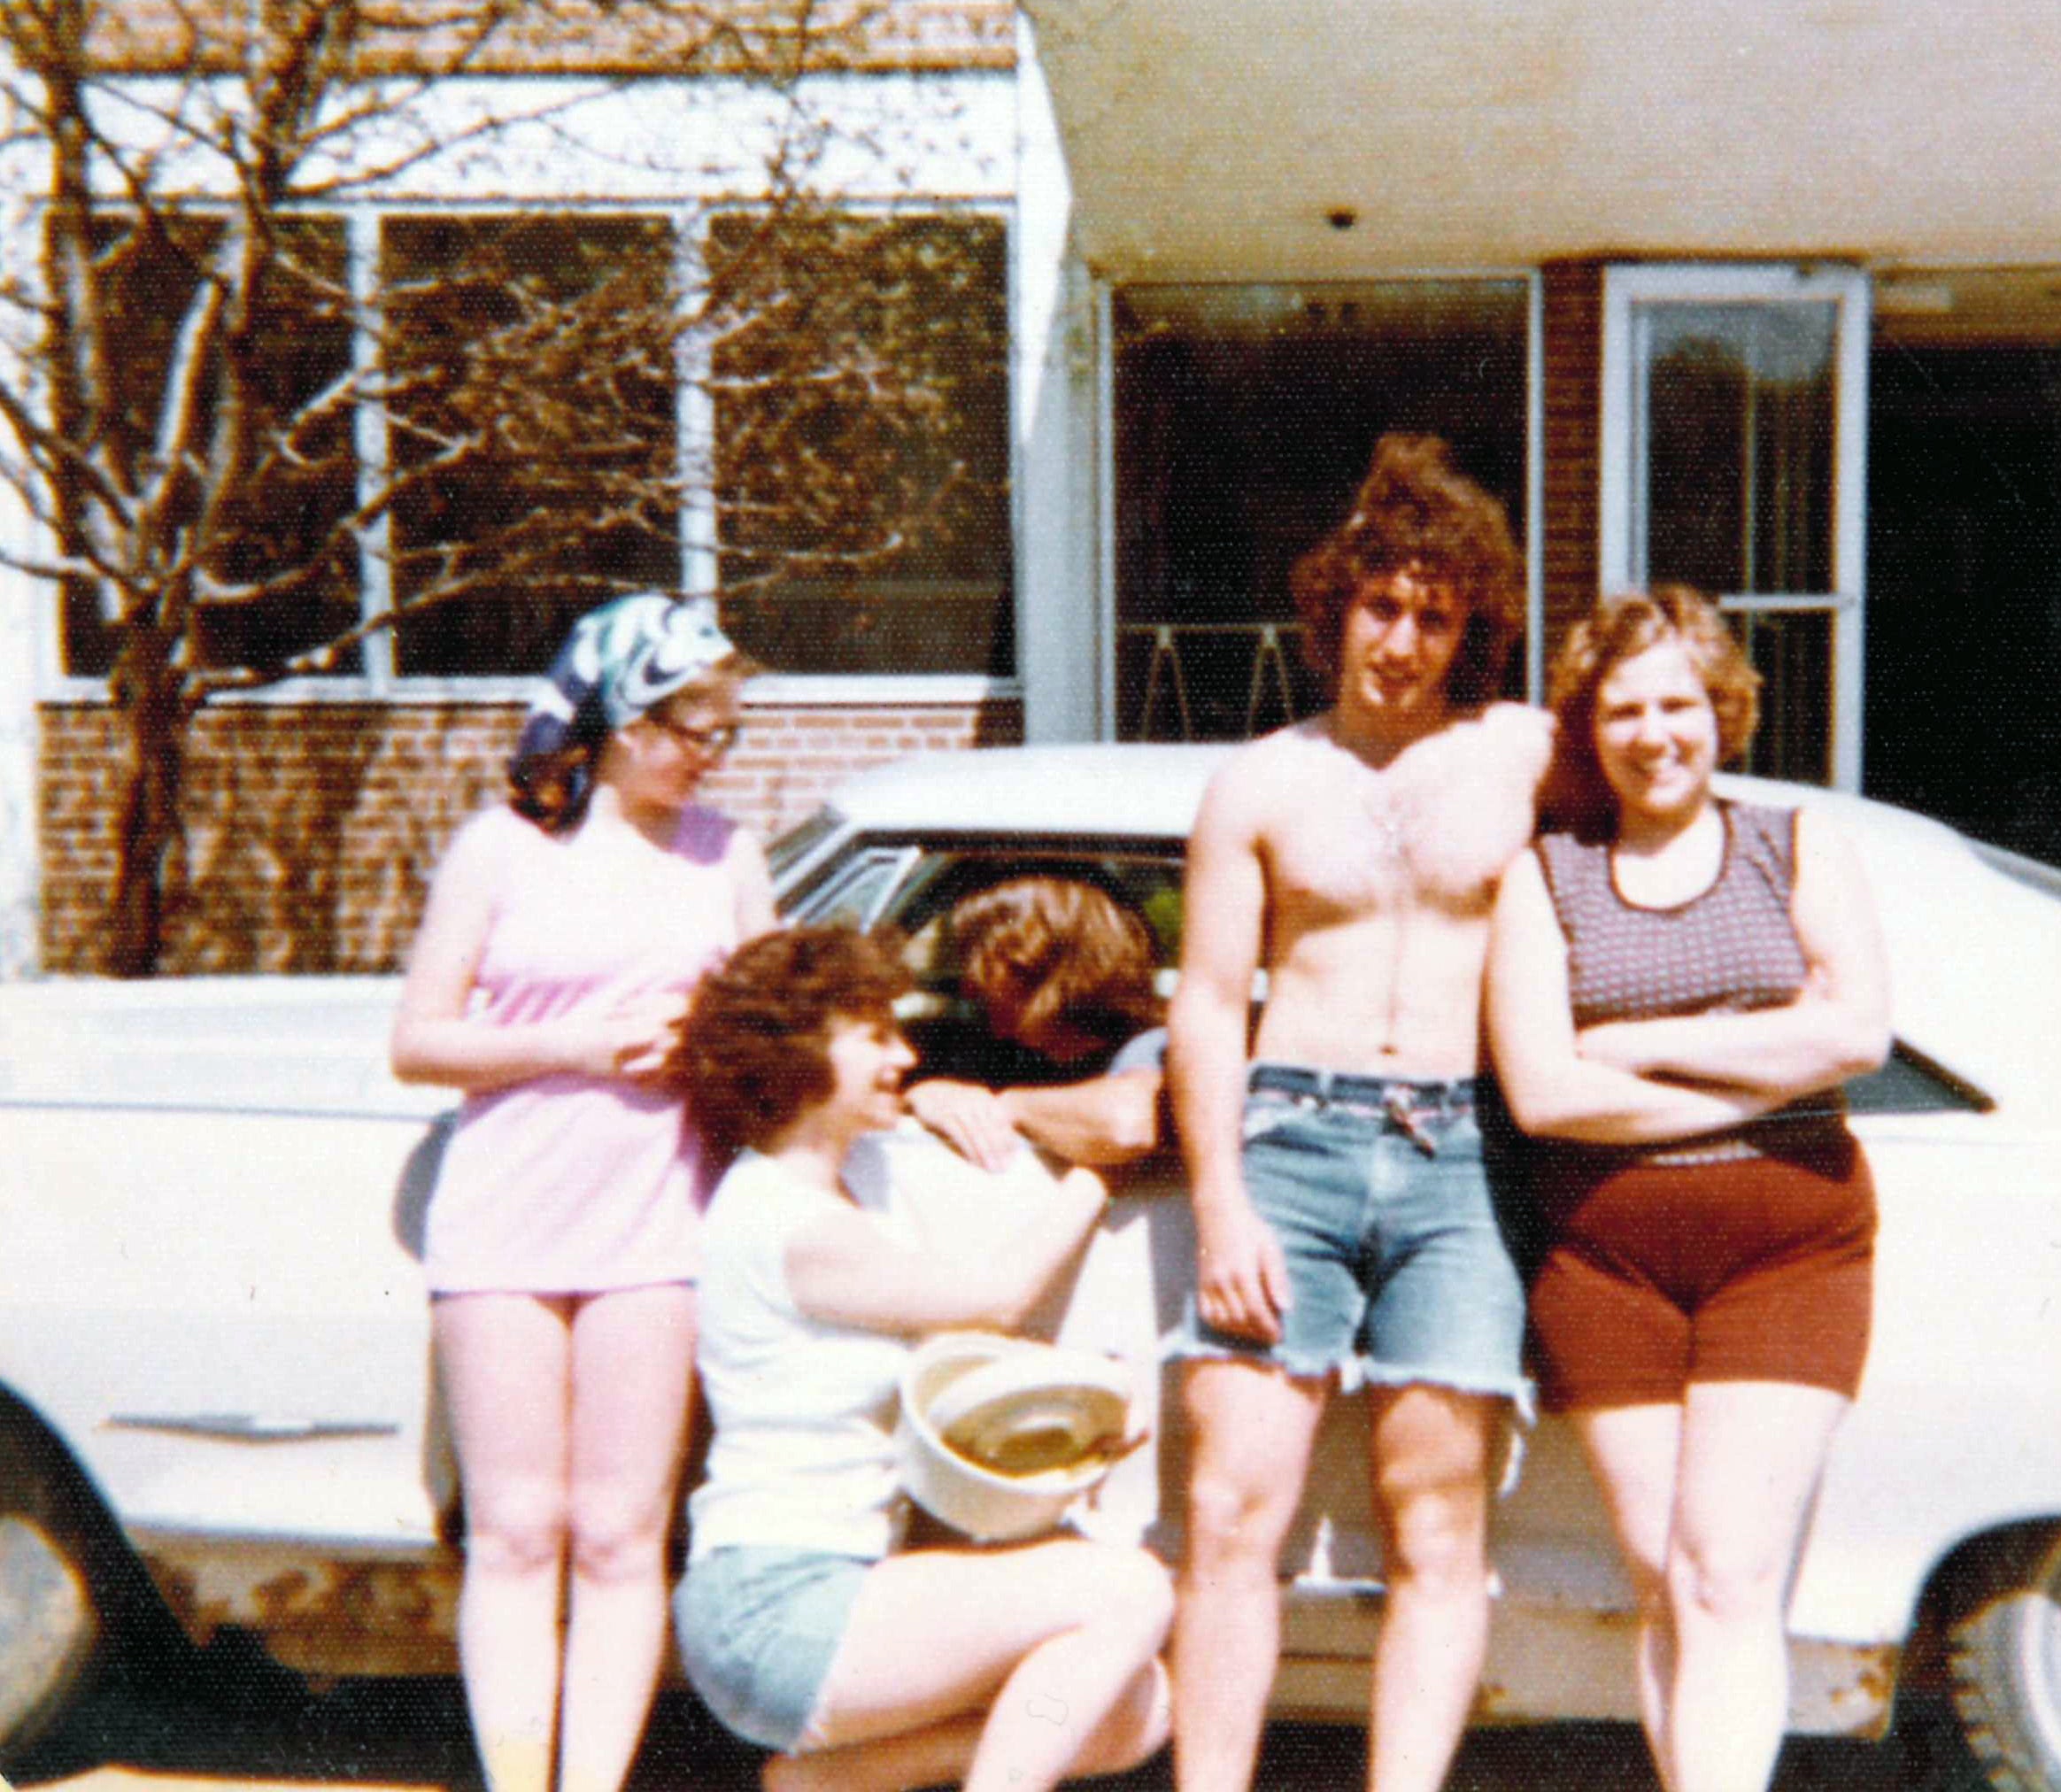 Car and students at Grebel in the '70s